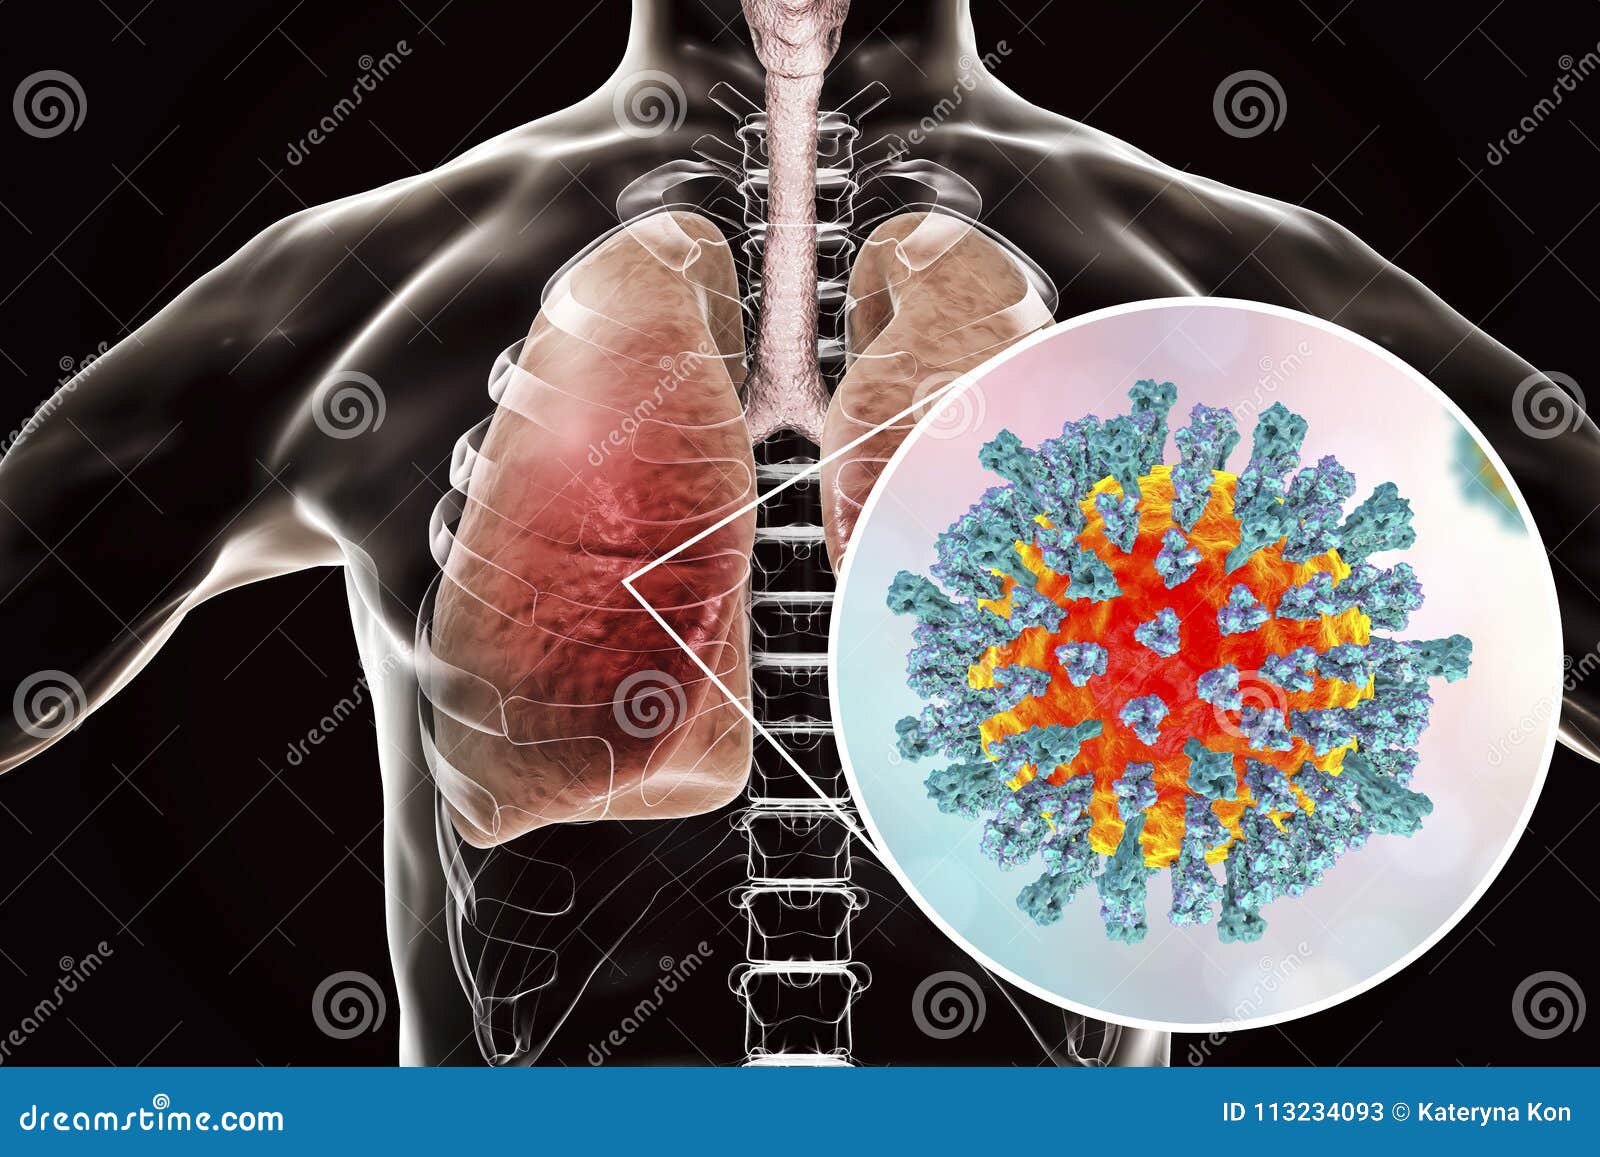 measles viruses in human respiratory system